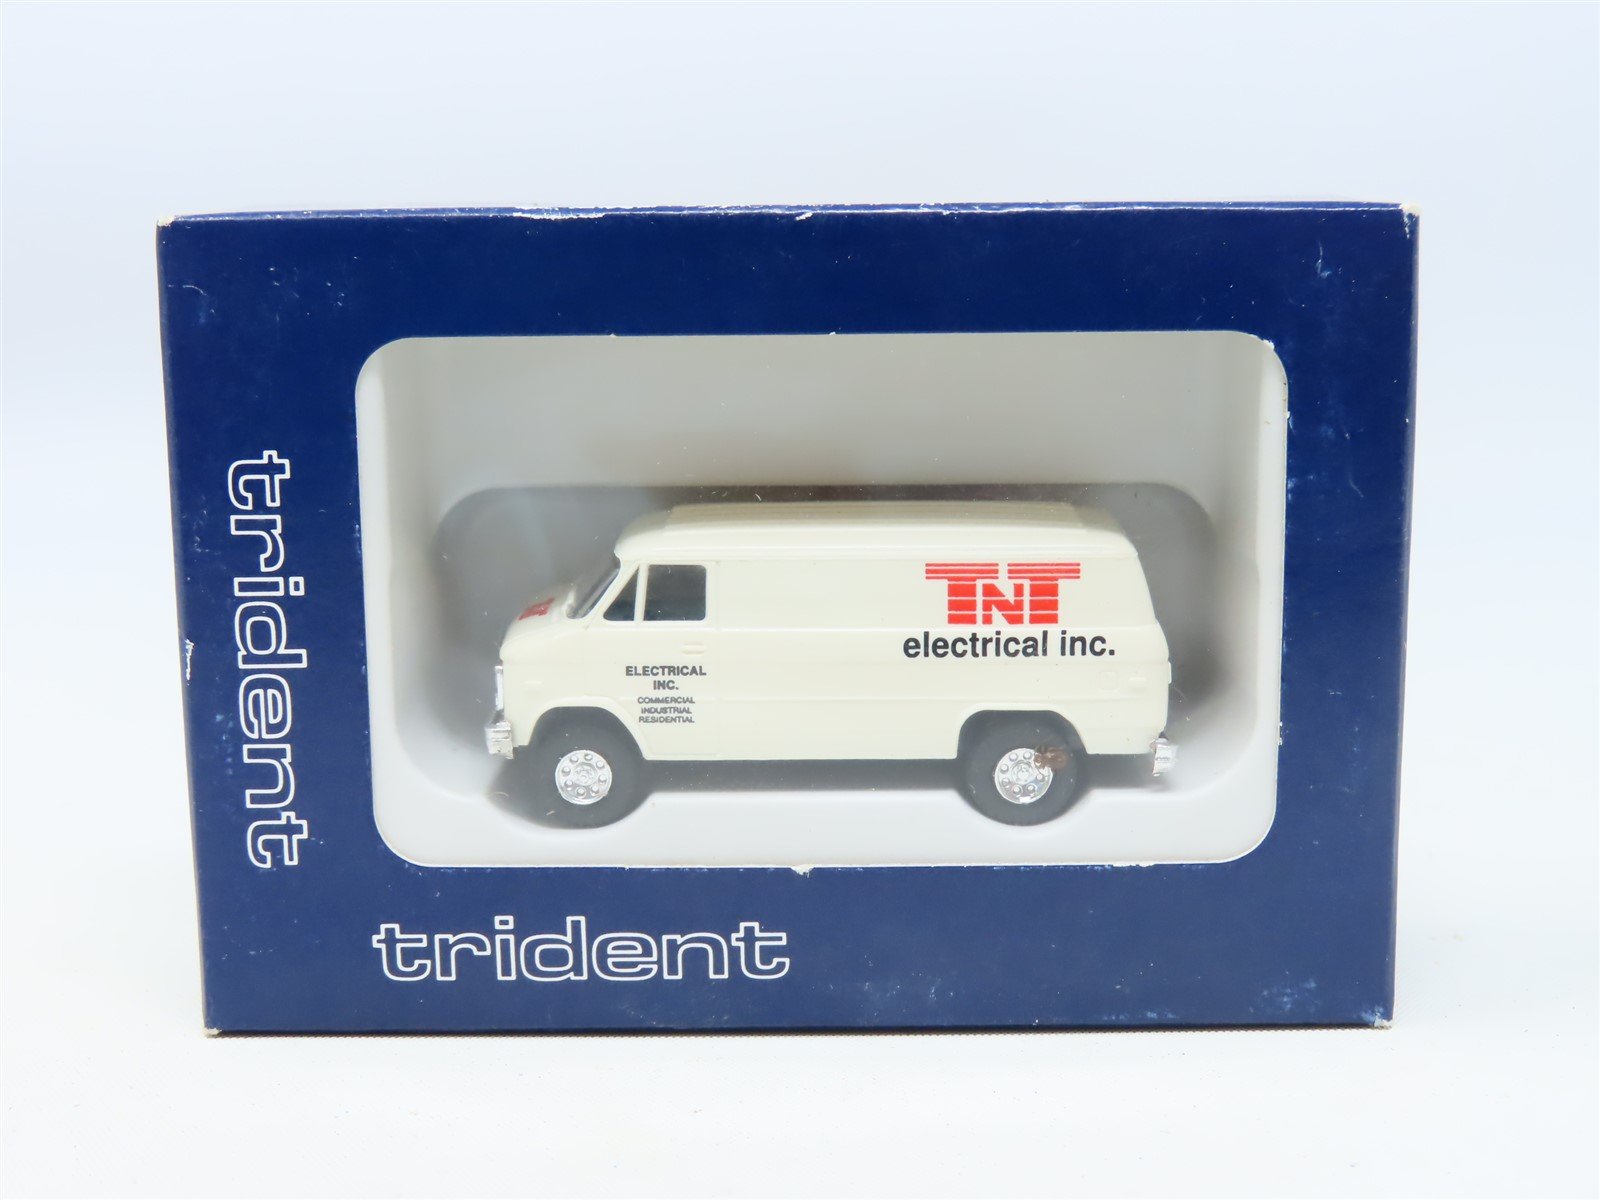 HO 1/87 Scale Trident #90074 TNT Electrical, Inc. Work Van